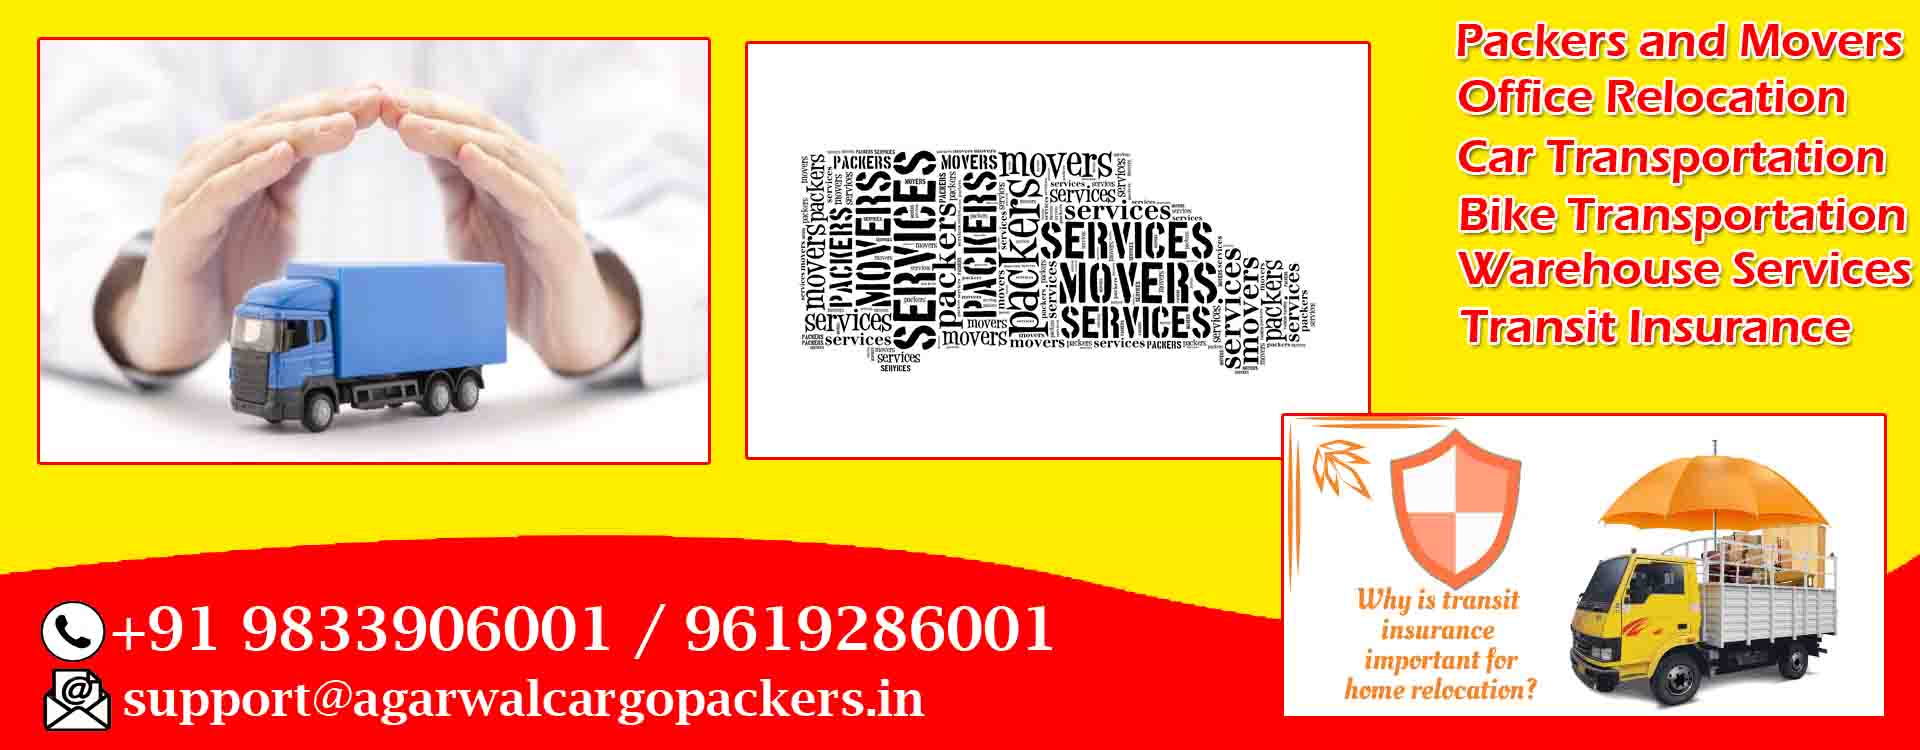 Packers and Movers KC Marg